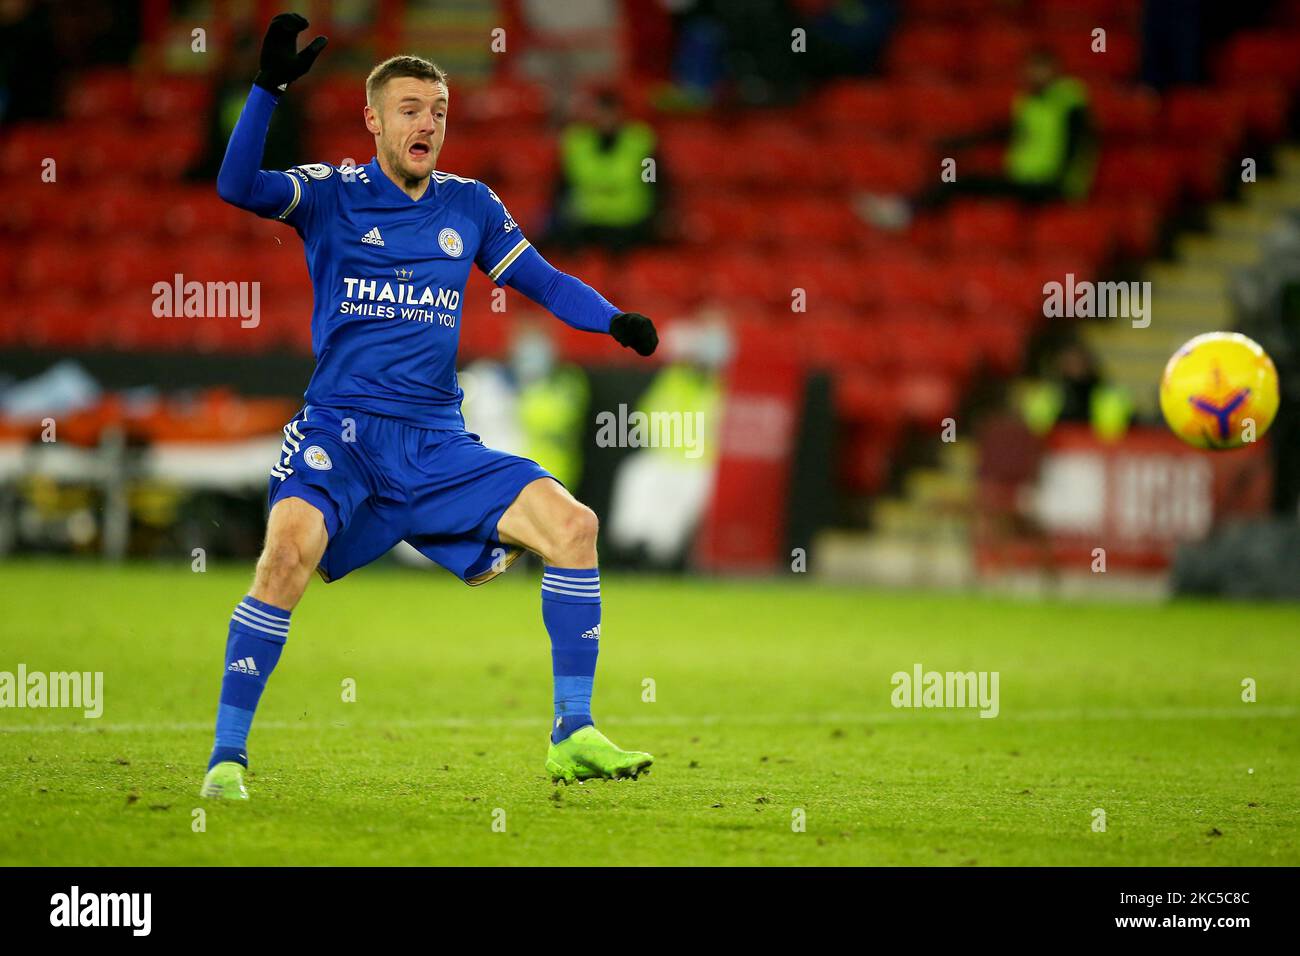 Leicesters Jamie Vardy shoots and scores to make it 2-1 during the Premier League match between Sheffield United and Leicester City at Bramall Lane, Sheffield on Saturday 5th December 2020. (Photo by Chris Donnelly/MI News/NurPhoto) Stock Photo